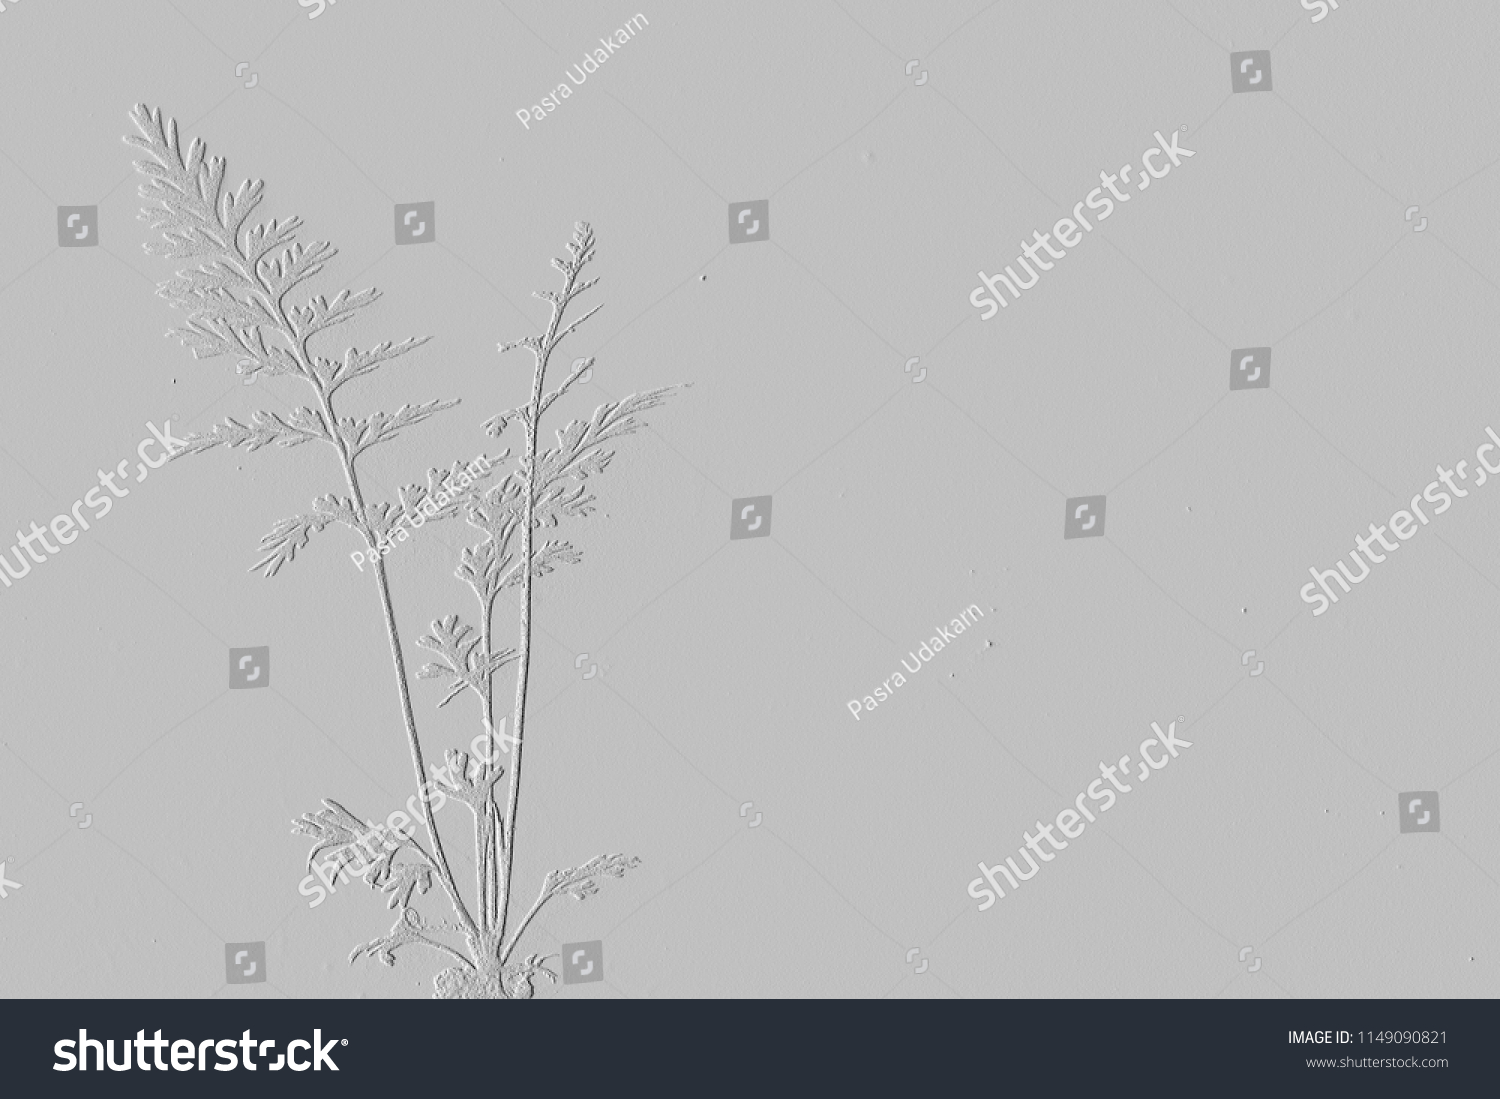 Textures of embossed leaves on background grey #1149090821